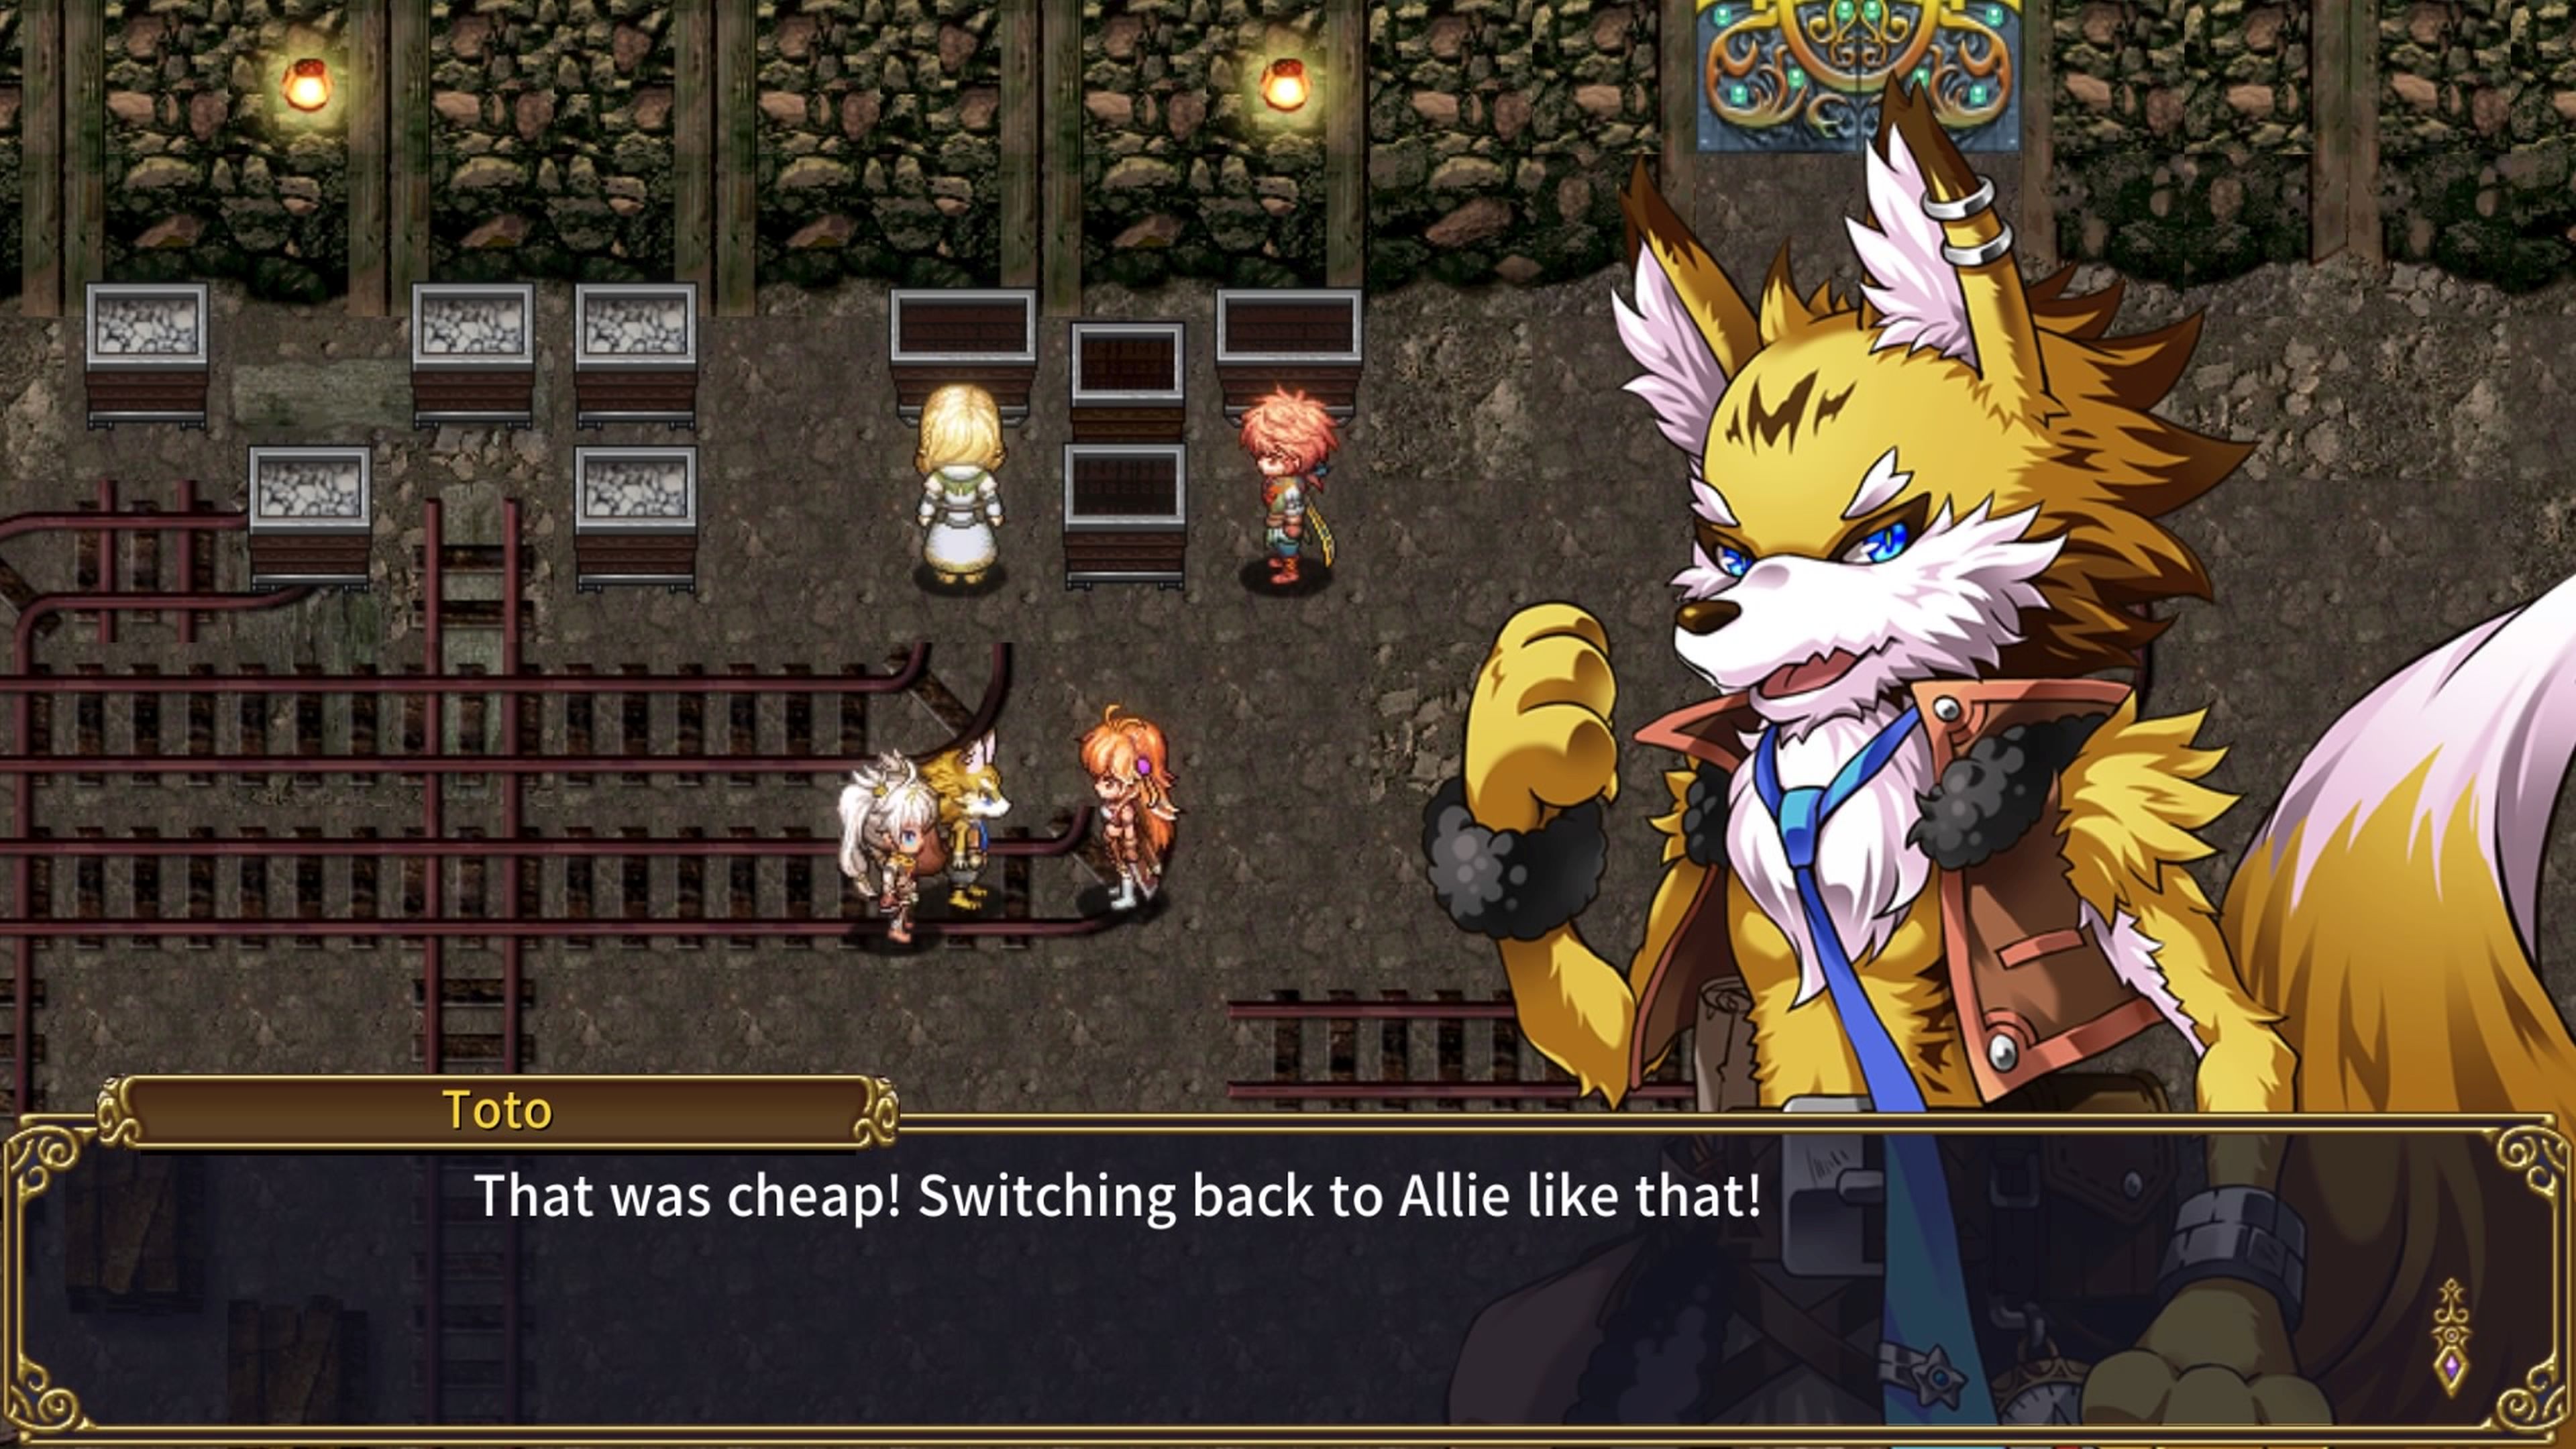 Ruinverse is a turn-based RPG for iOS and Android that follows a young girl  with two souls